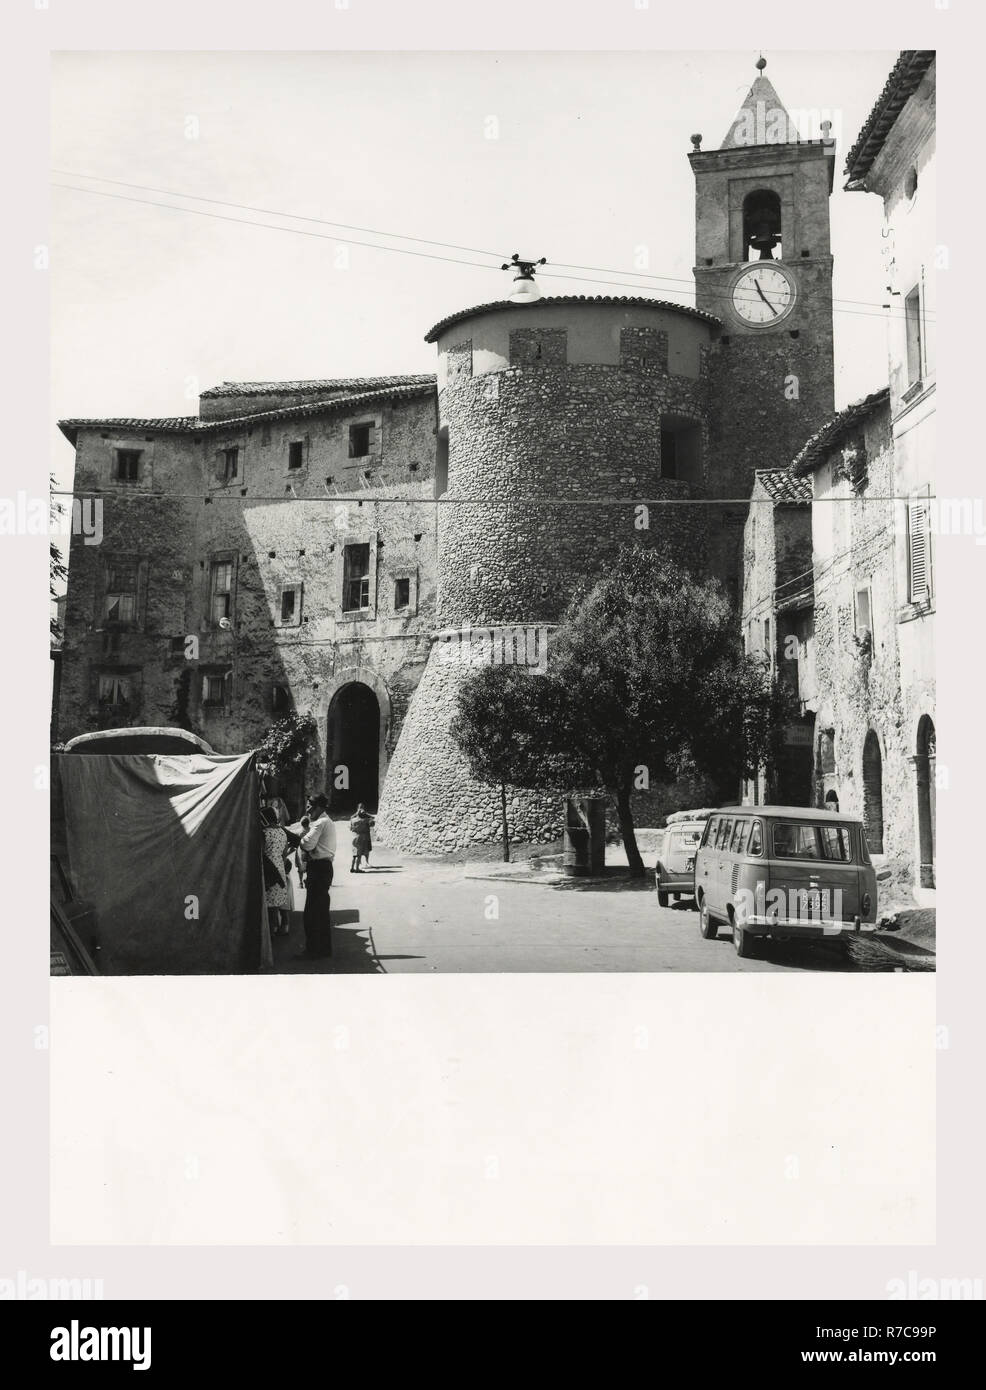 Lazio Rieti Torricella in Sabina Borgo Medievale, this is my Italy, the  italian country of visual history, Medieval Architecture. The entrance to  the medieval town opens upon a large circular tower dating